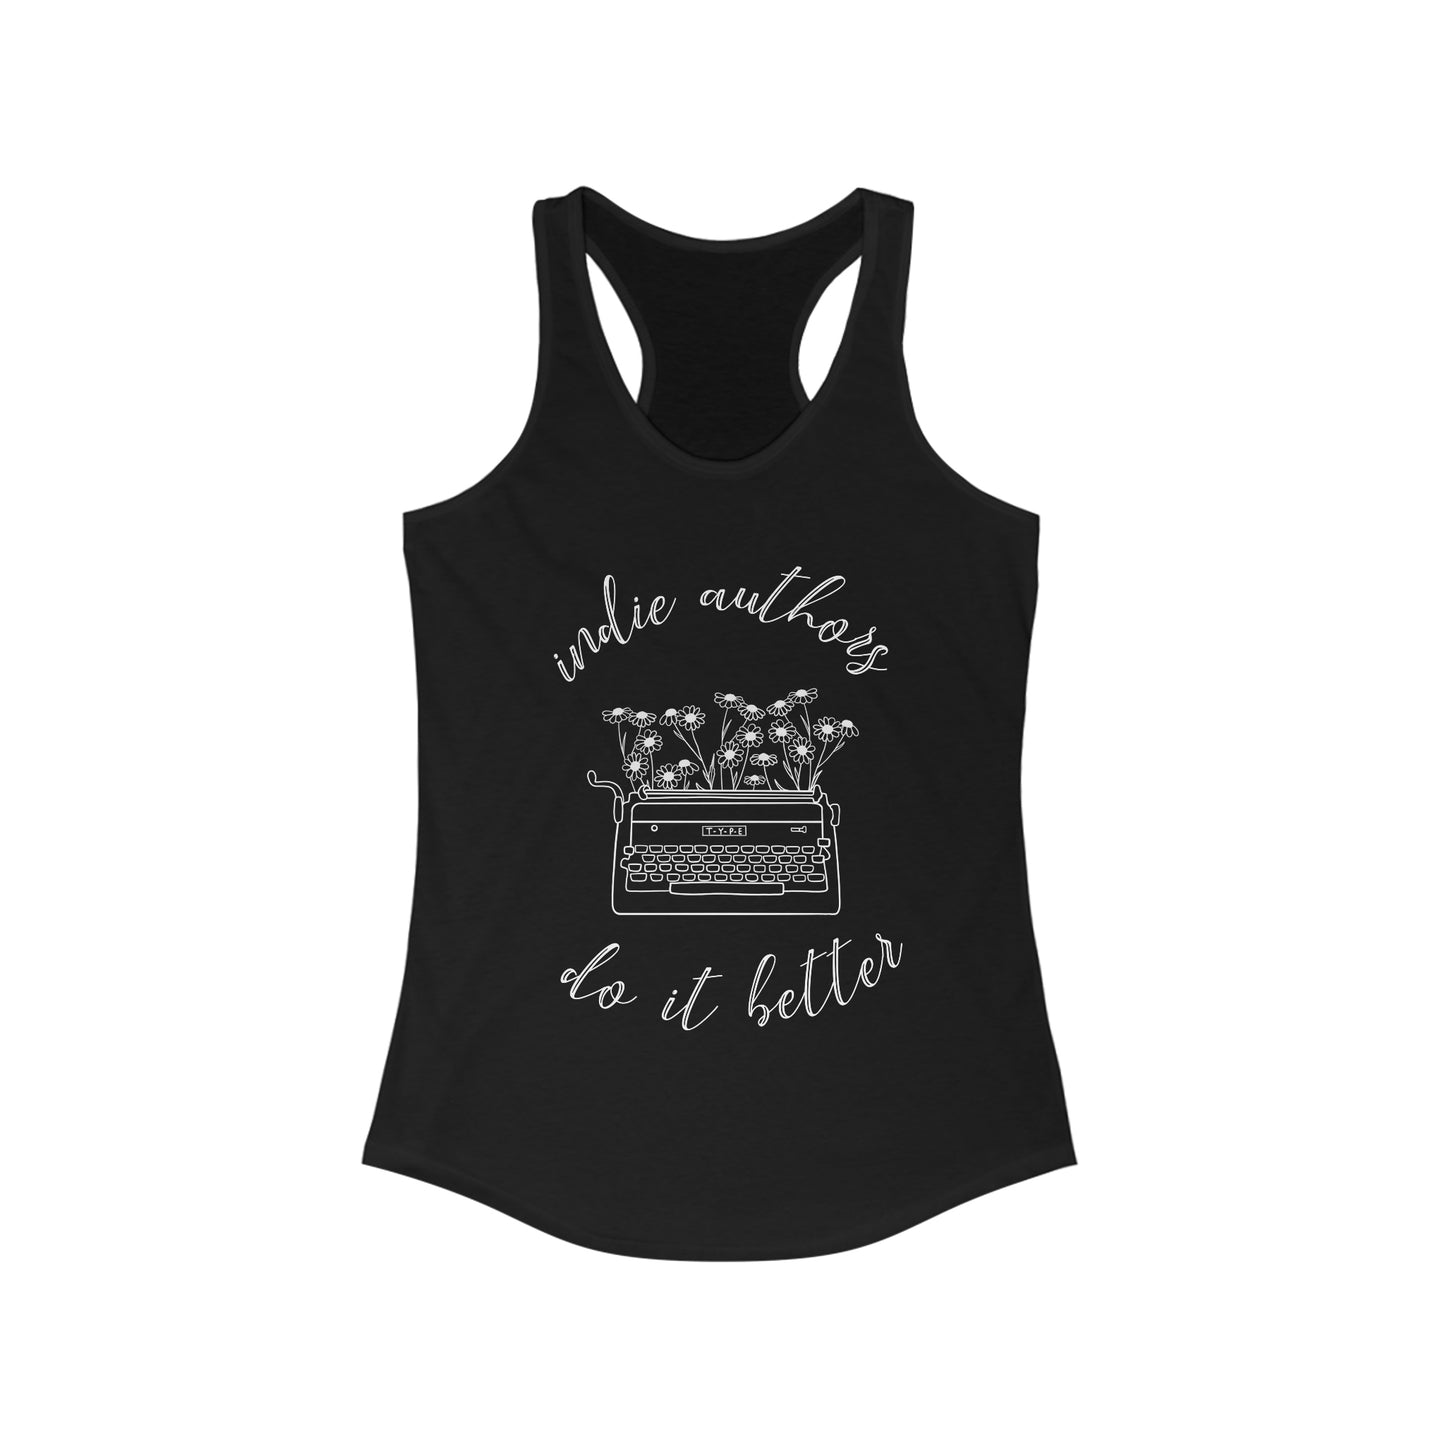 Indie Authors do it better Racerback Tank